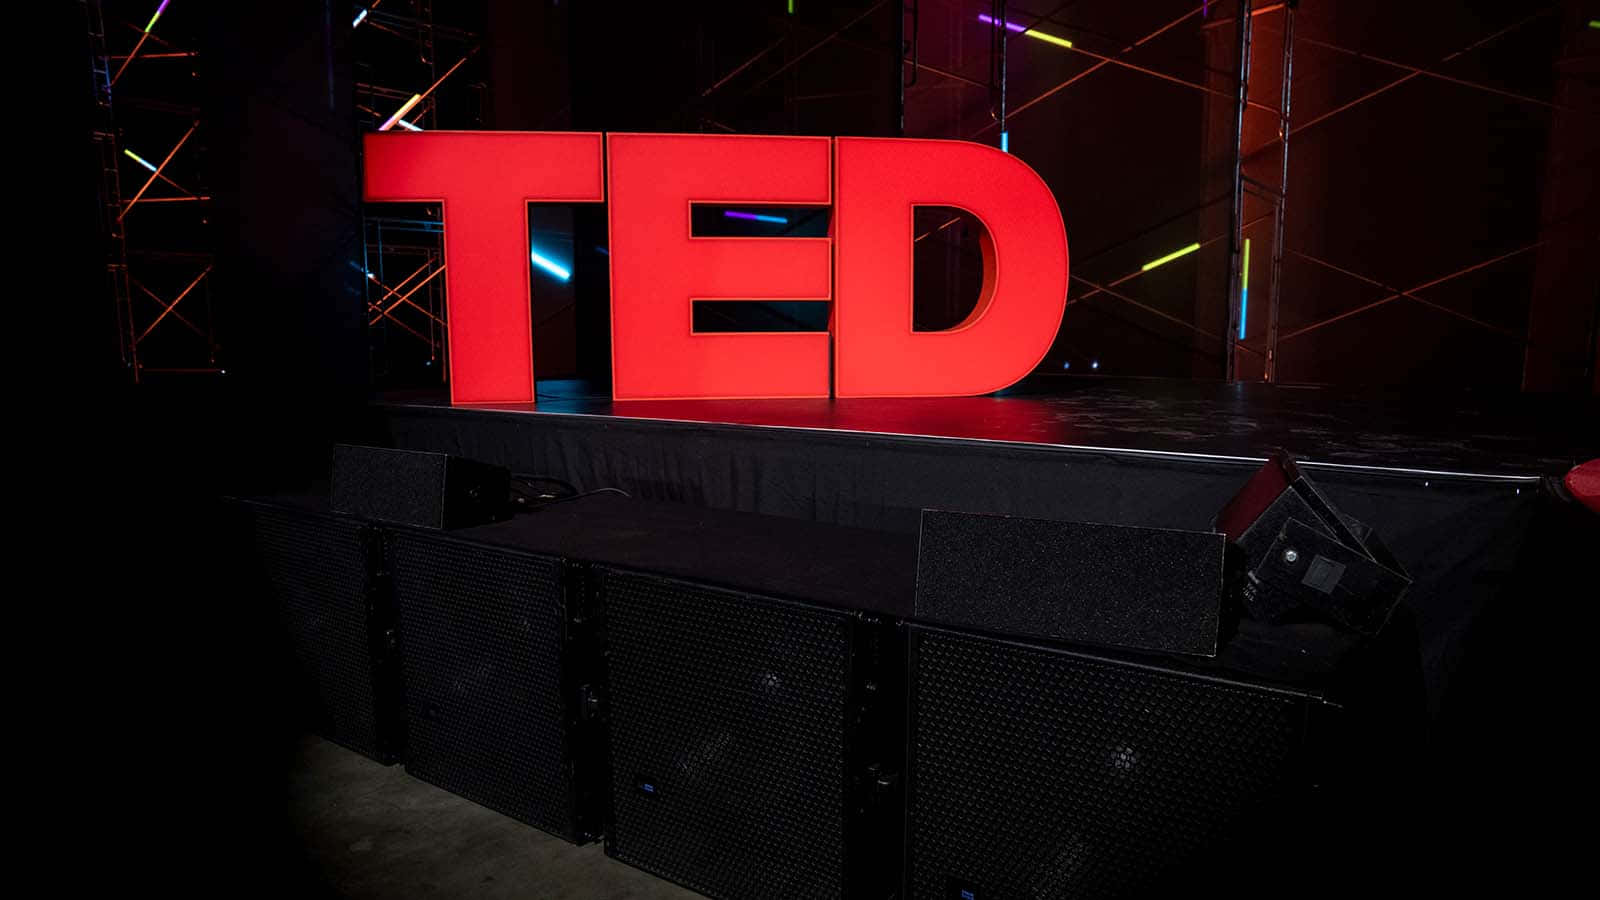 Ted Talk Background